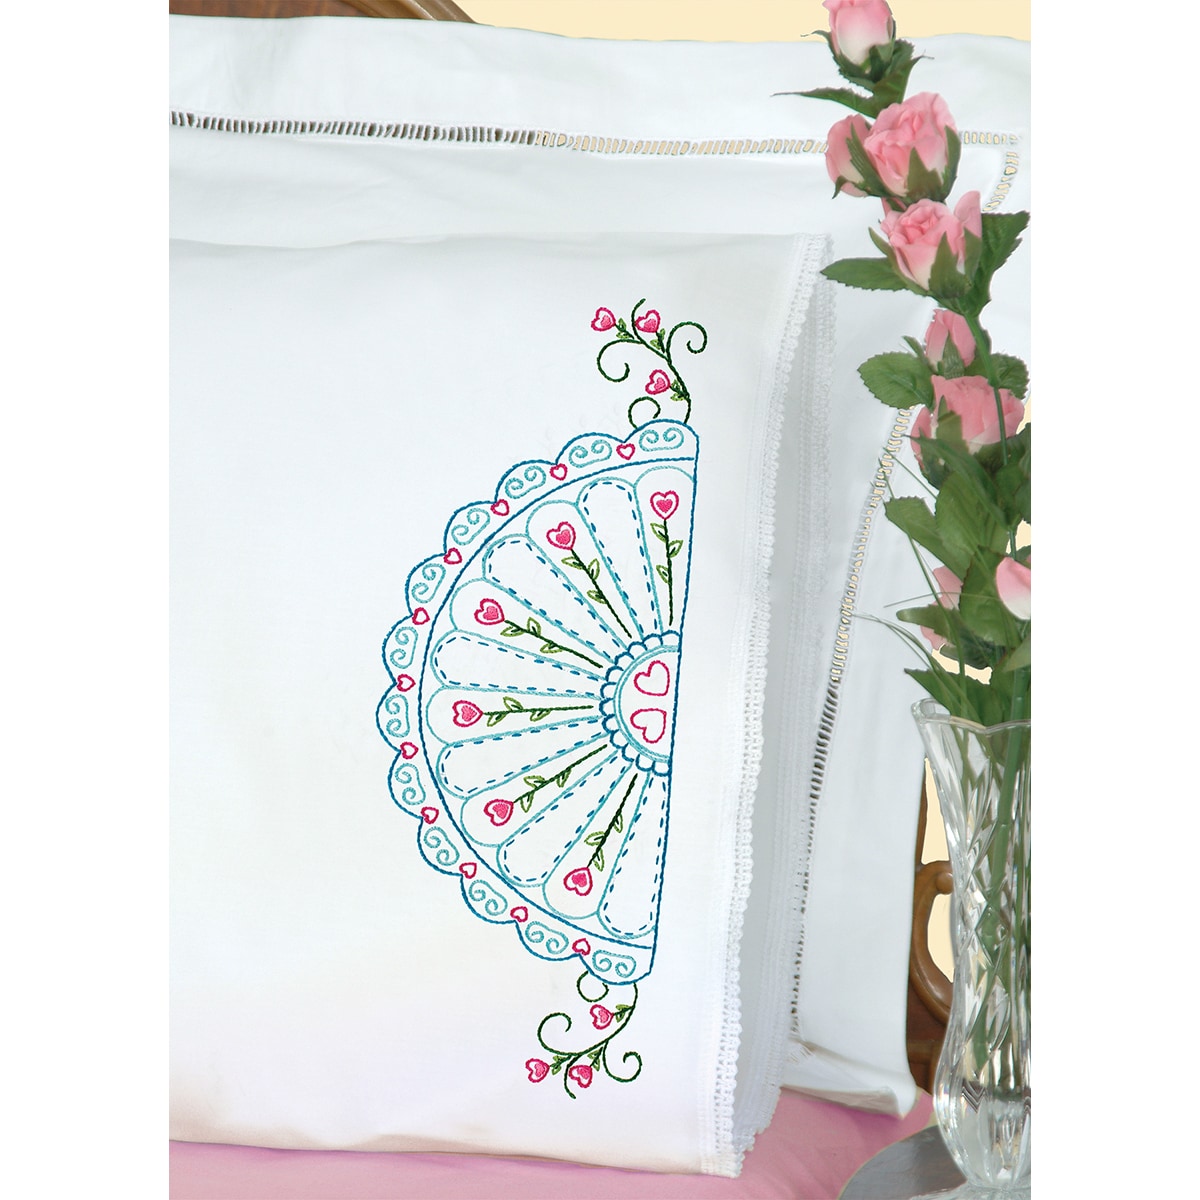 Stamped Pillowcases With White Lace Edge 2/pkg fan